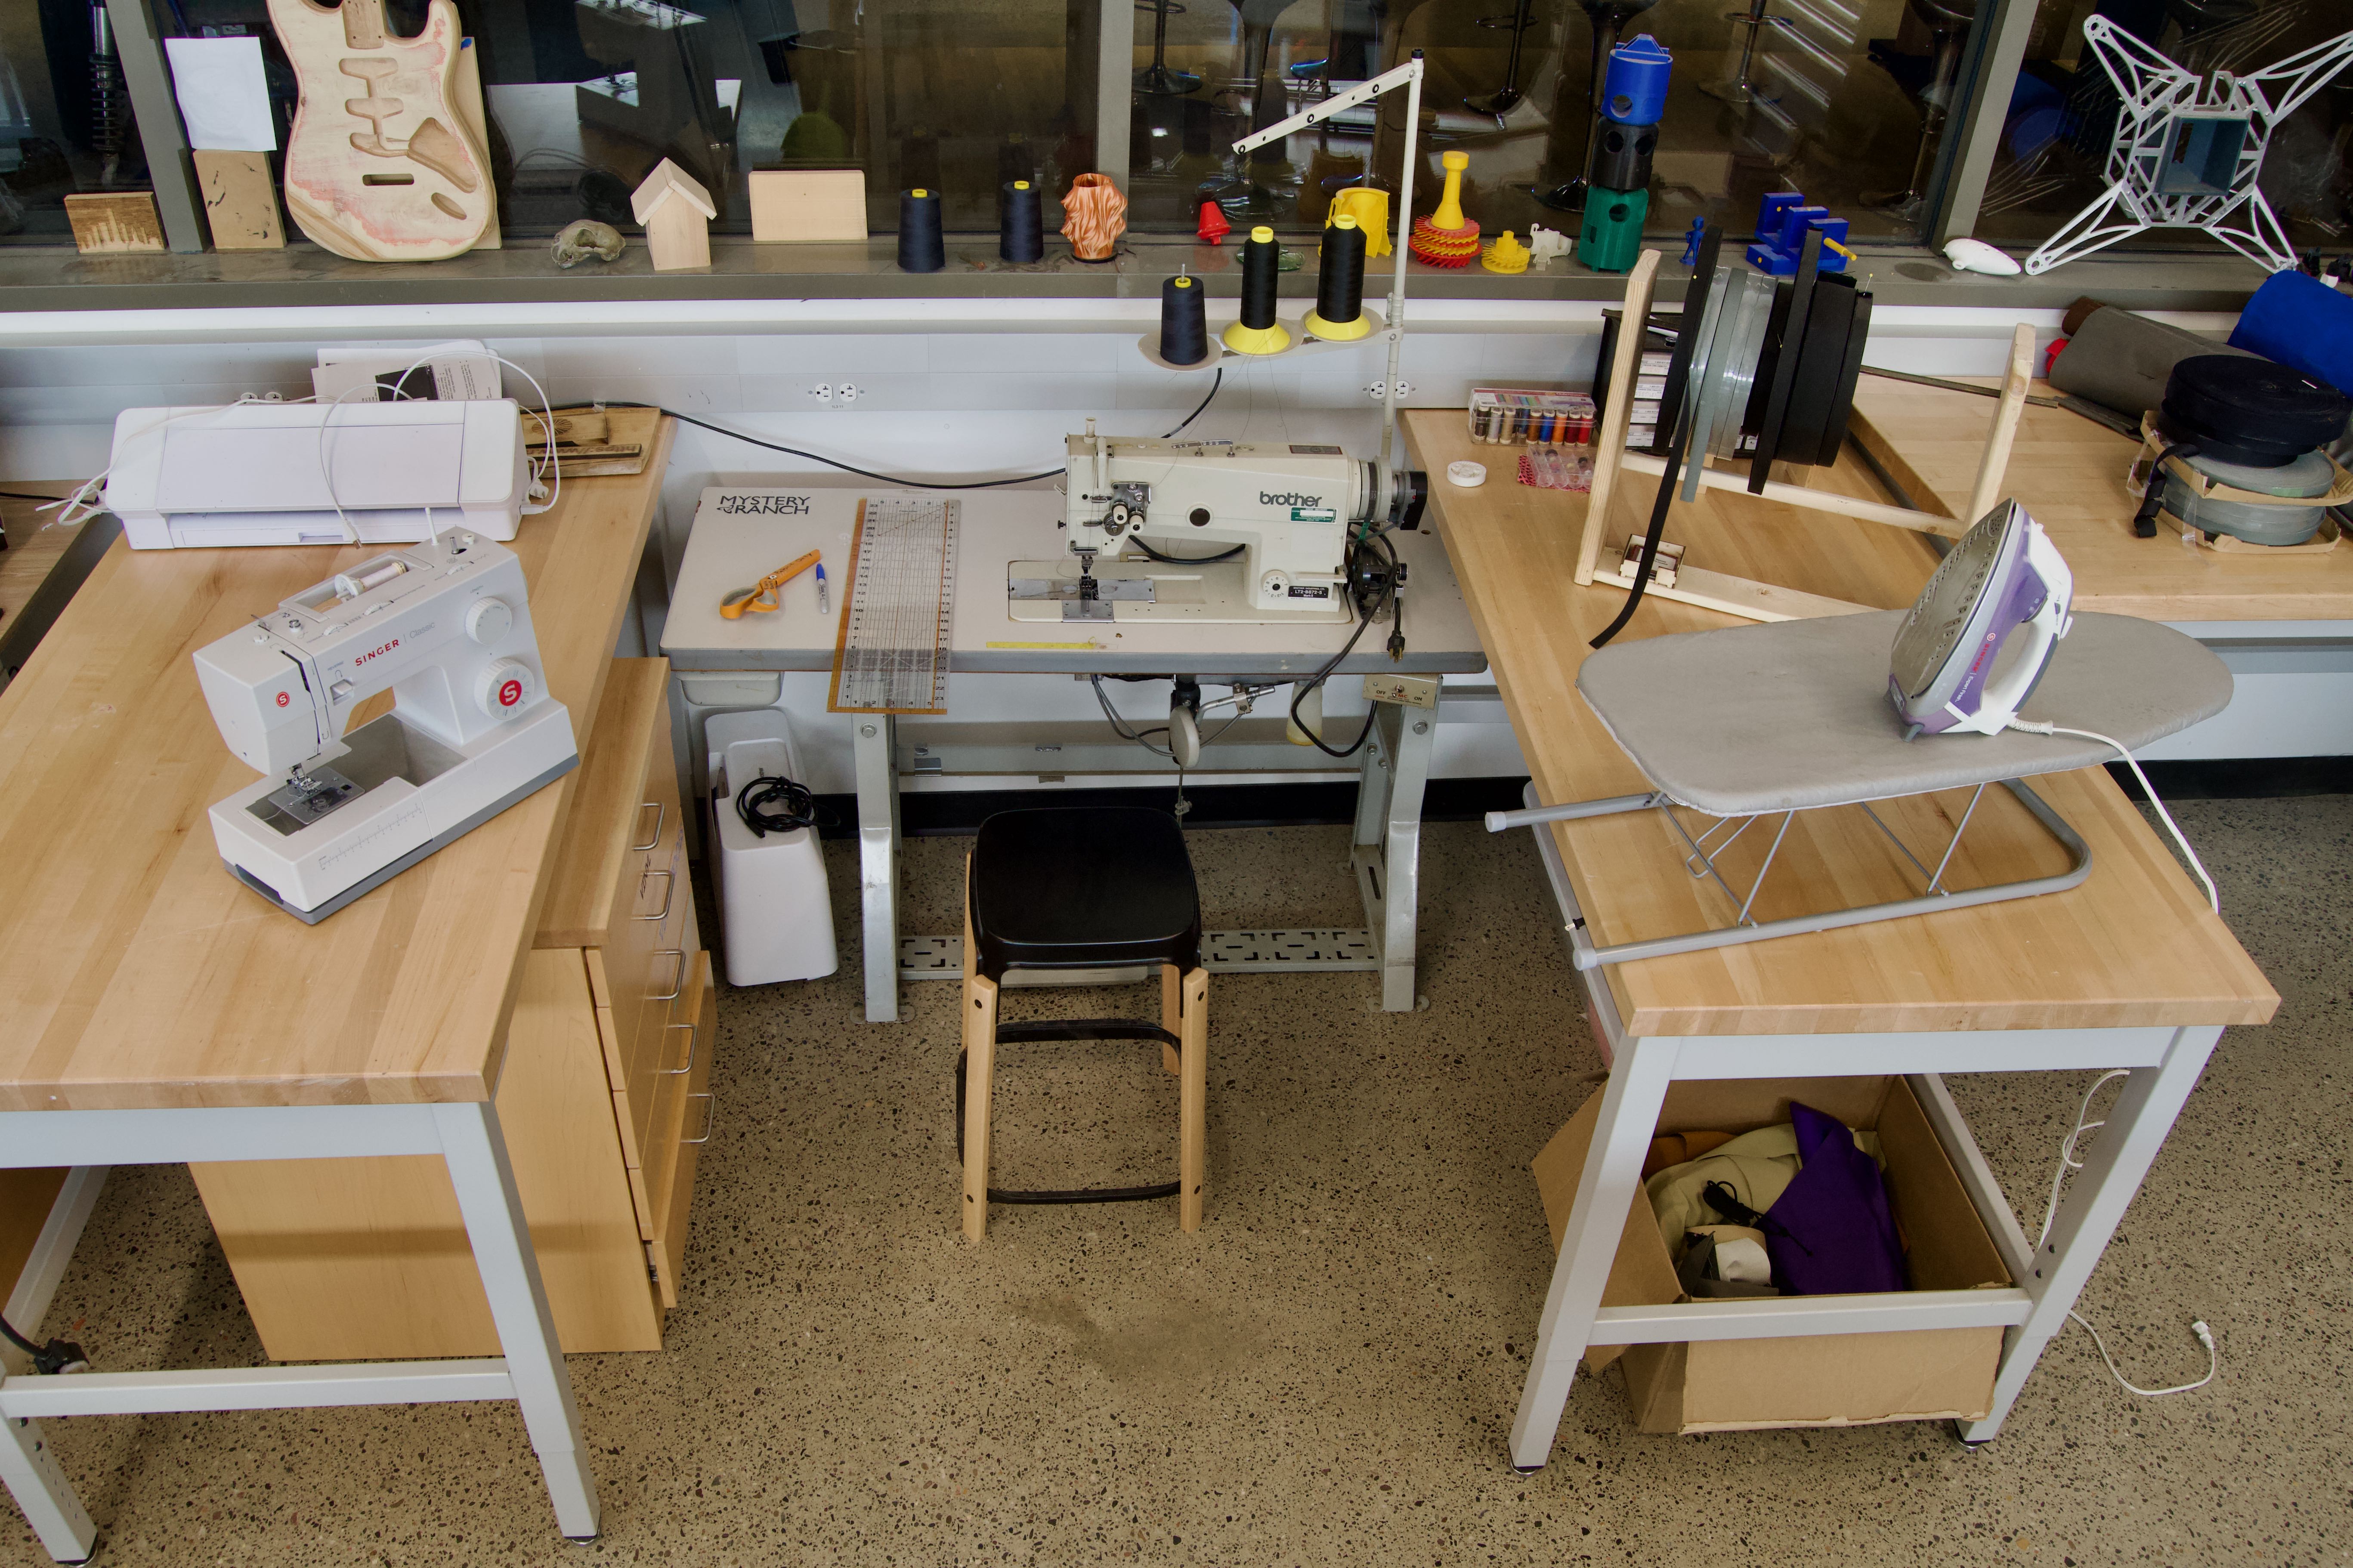 Sewing machines and an iron viewed from above